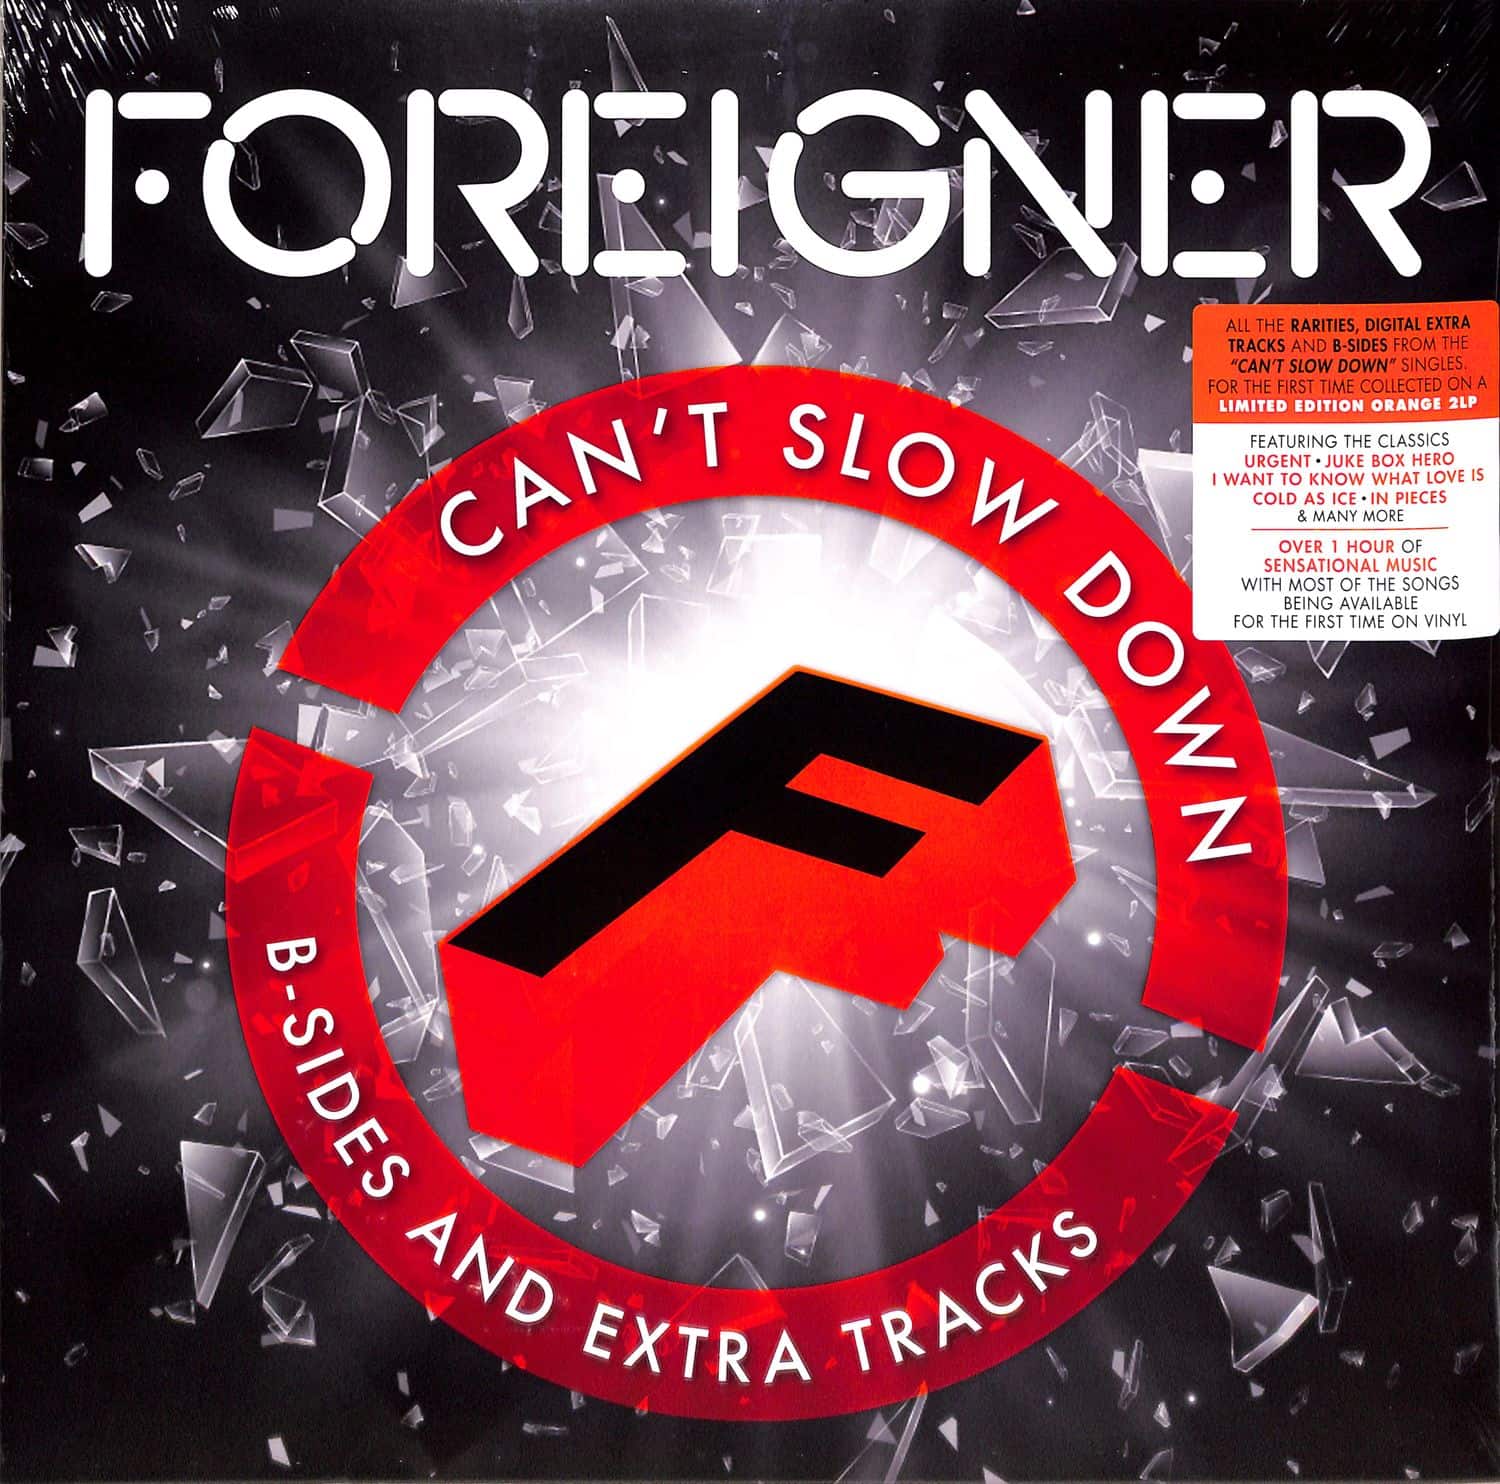 Foreigner - CANT SLOW DOWN: B-SIDES & EXTRA TRACKS 